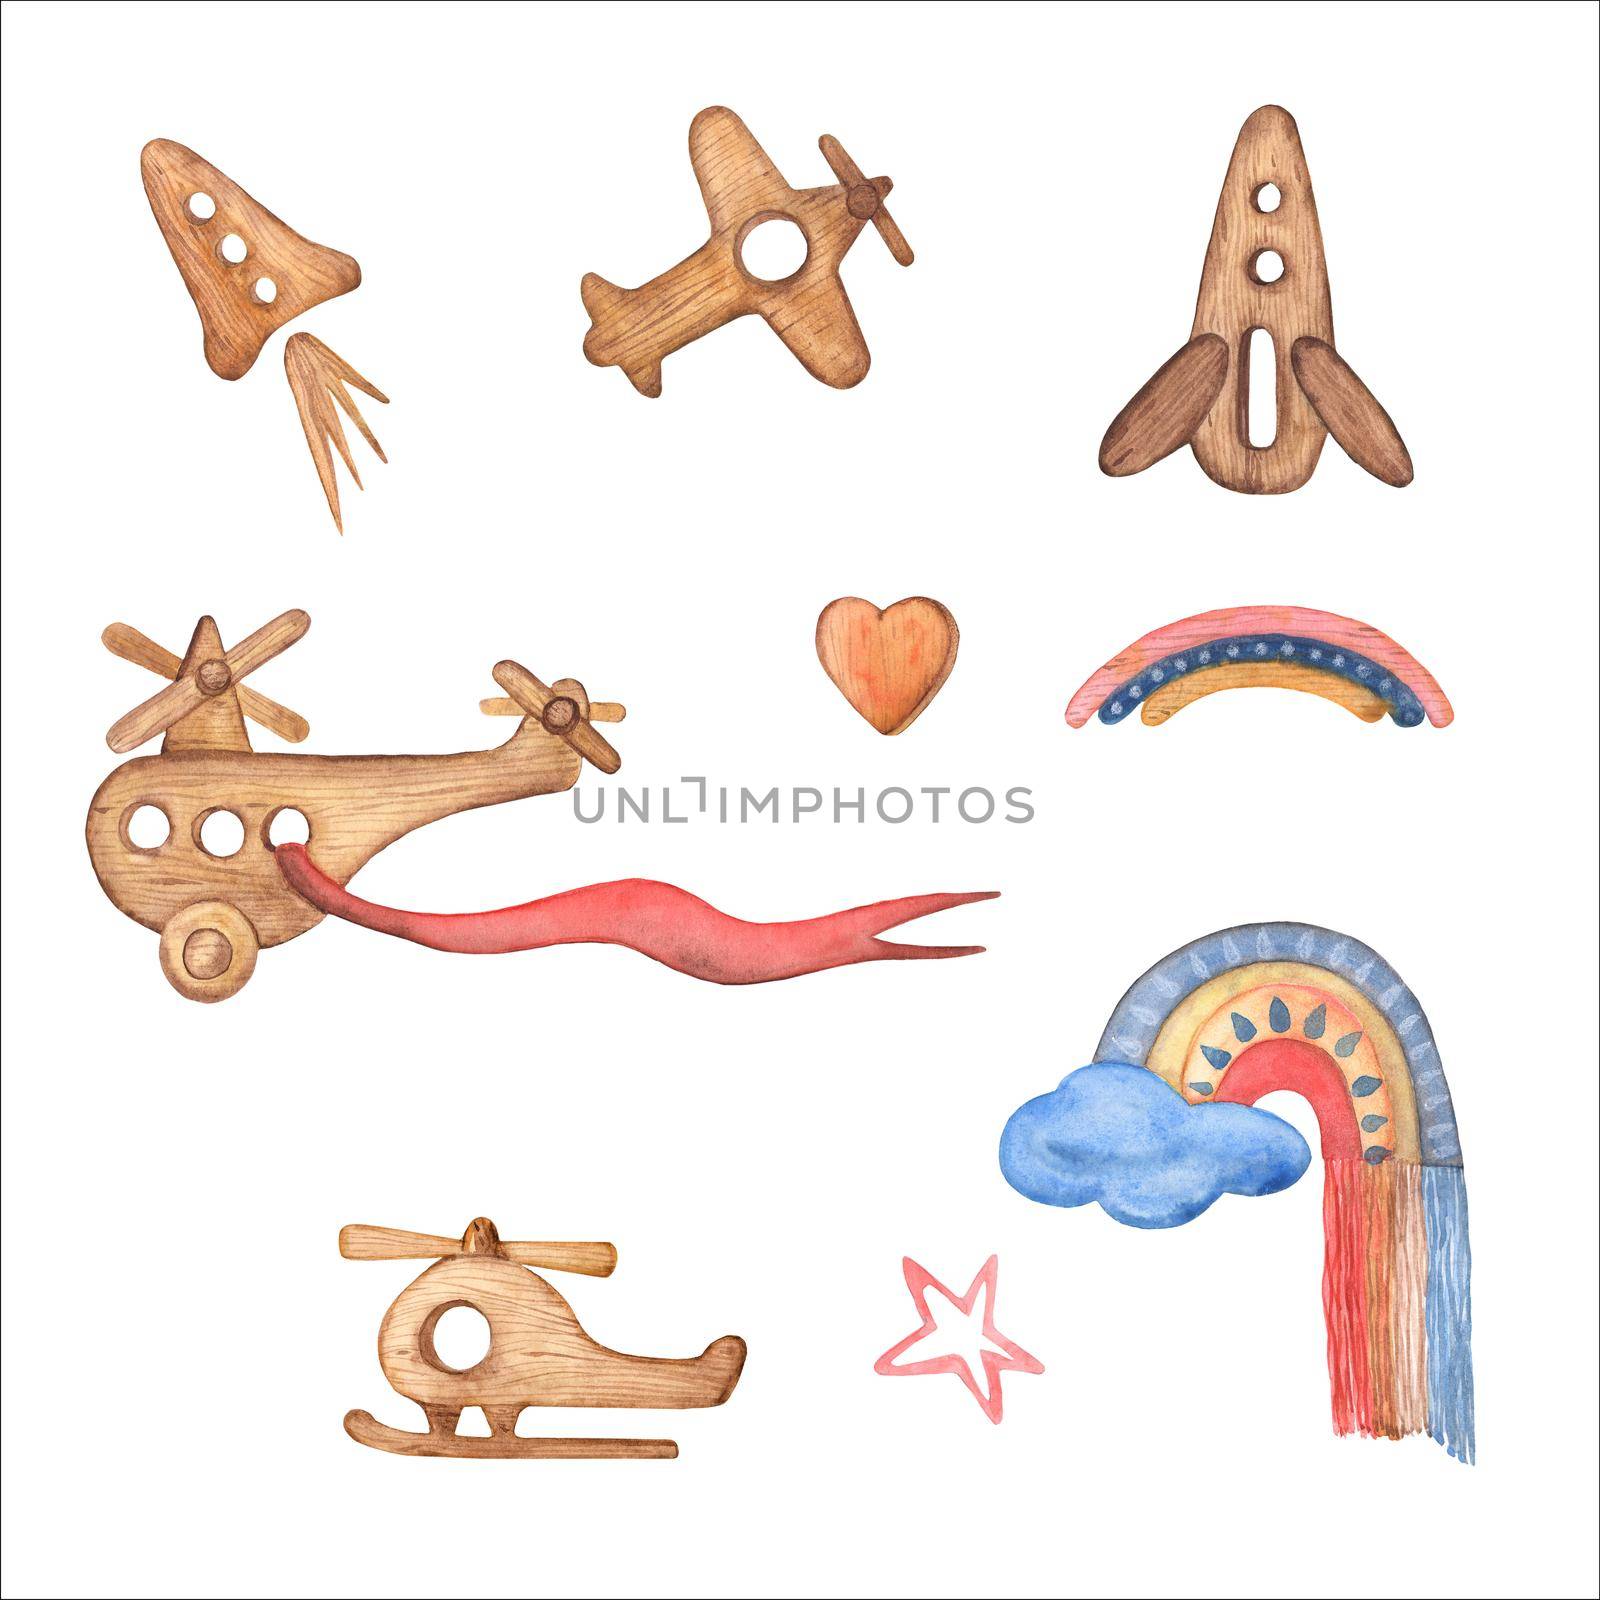 Fly in the sky Watercolor Clipart. Kids Wooden toys. airplane, helicopter, rocket, hot air balloon, rainbow. Nursery Hand-drawn Art Decor. Baby boy. Set Illustrations Isolated on white background.